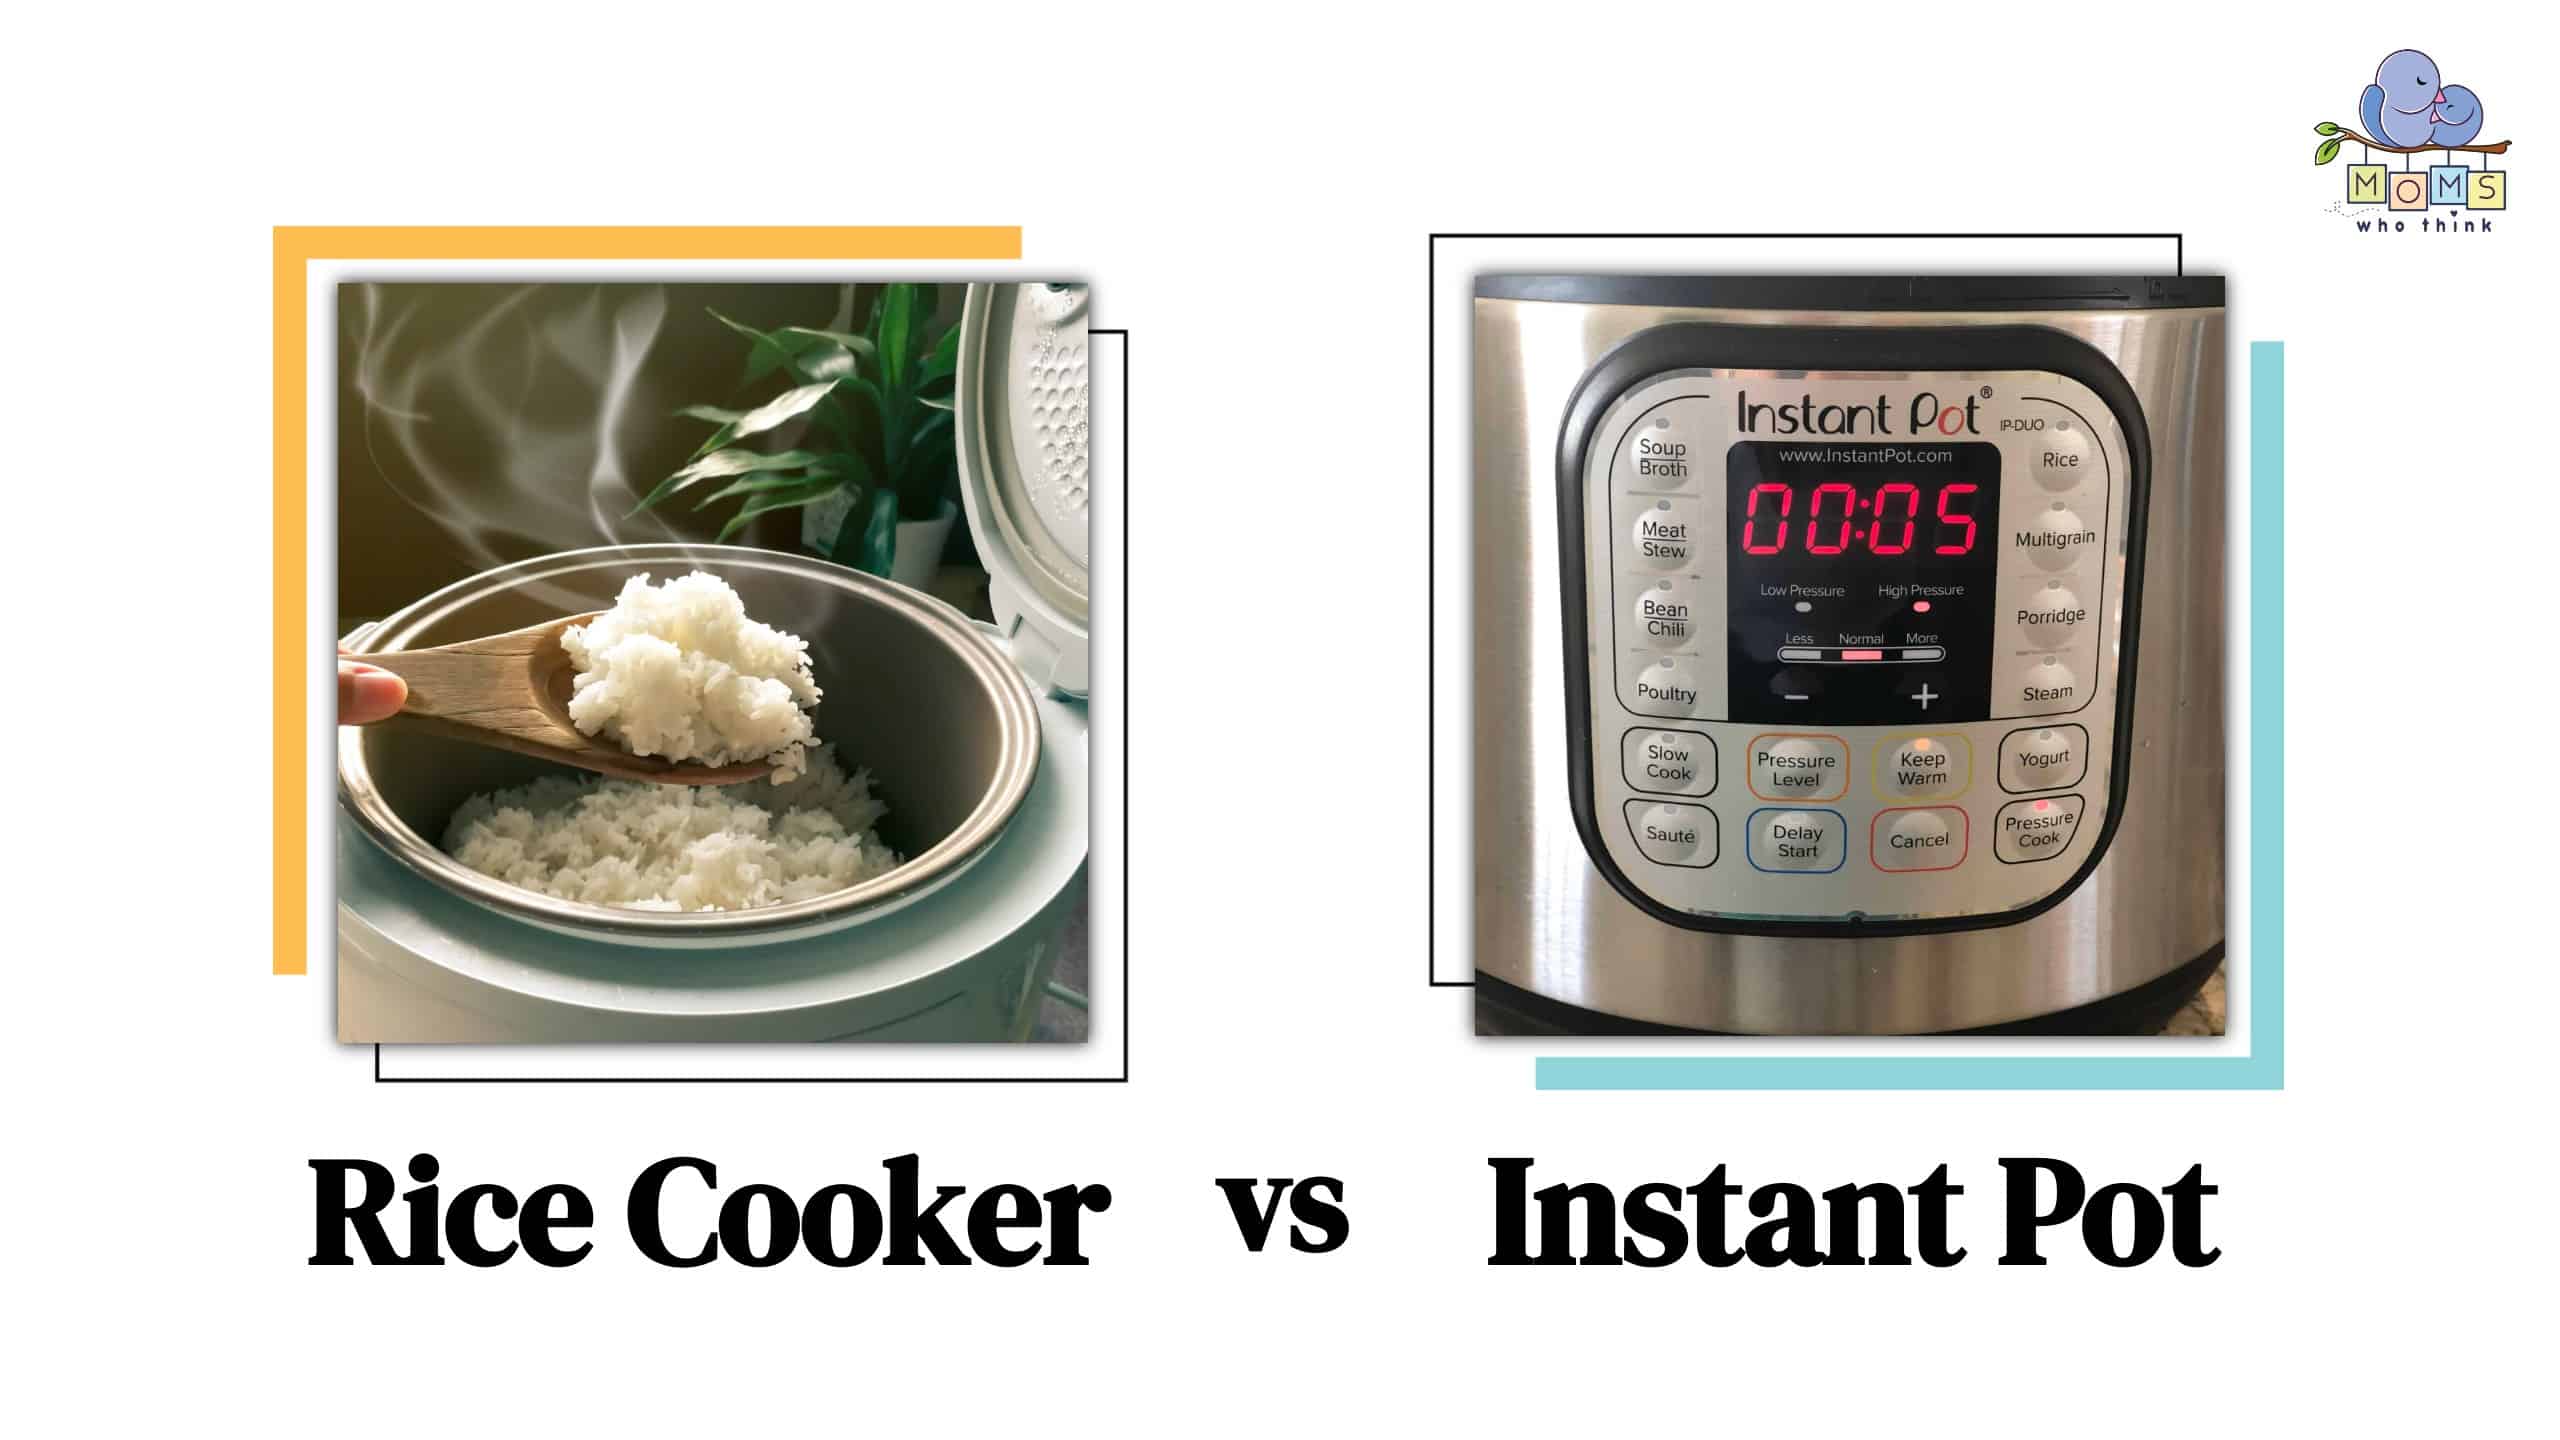 Rice Cooker vs Instant Pot: 3 Main Differences Between Them